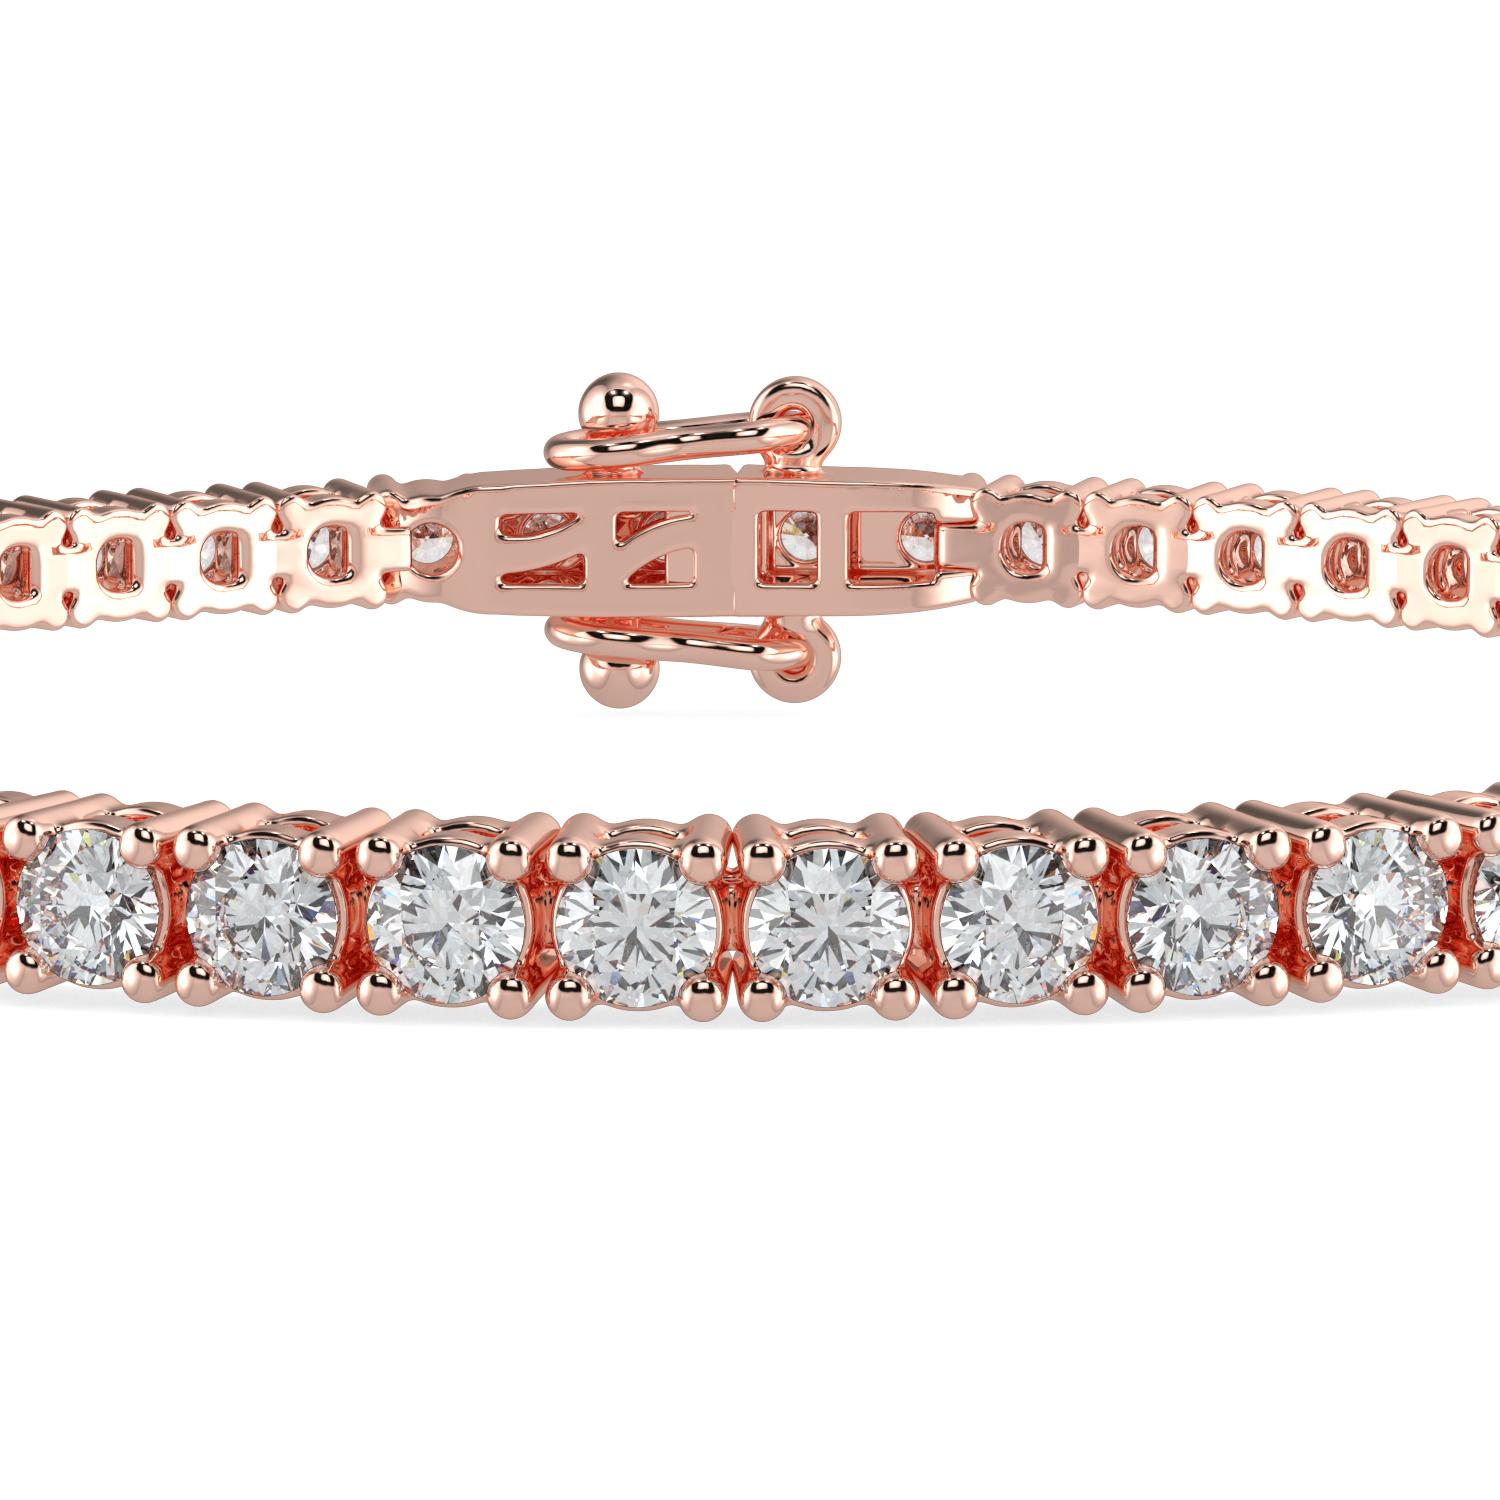 12.00 Carat Round Cut GH-I1 Natural Diamond Classic Tennis Bracelet 4 Prong 14K Rose Gold for Women

Specification
Brand: AAMIAA
Length: 7 Inches 
Color: GH
Carat Weight:12.00CTW
Clarity: I1

LUXURIOUS AND LASTING- Our bracelets are a luxurious and